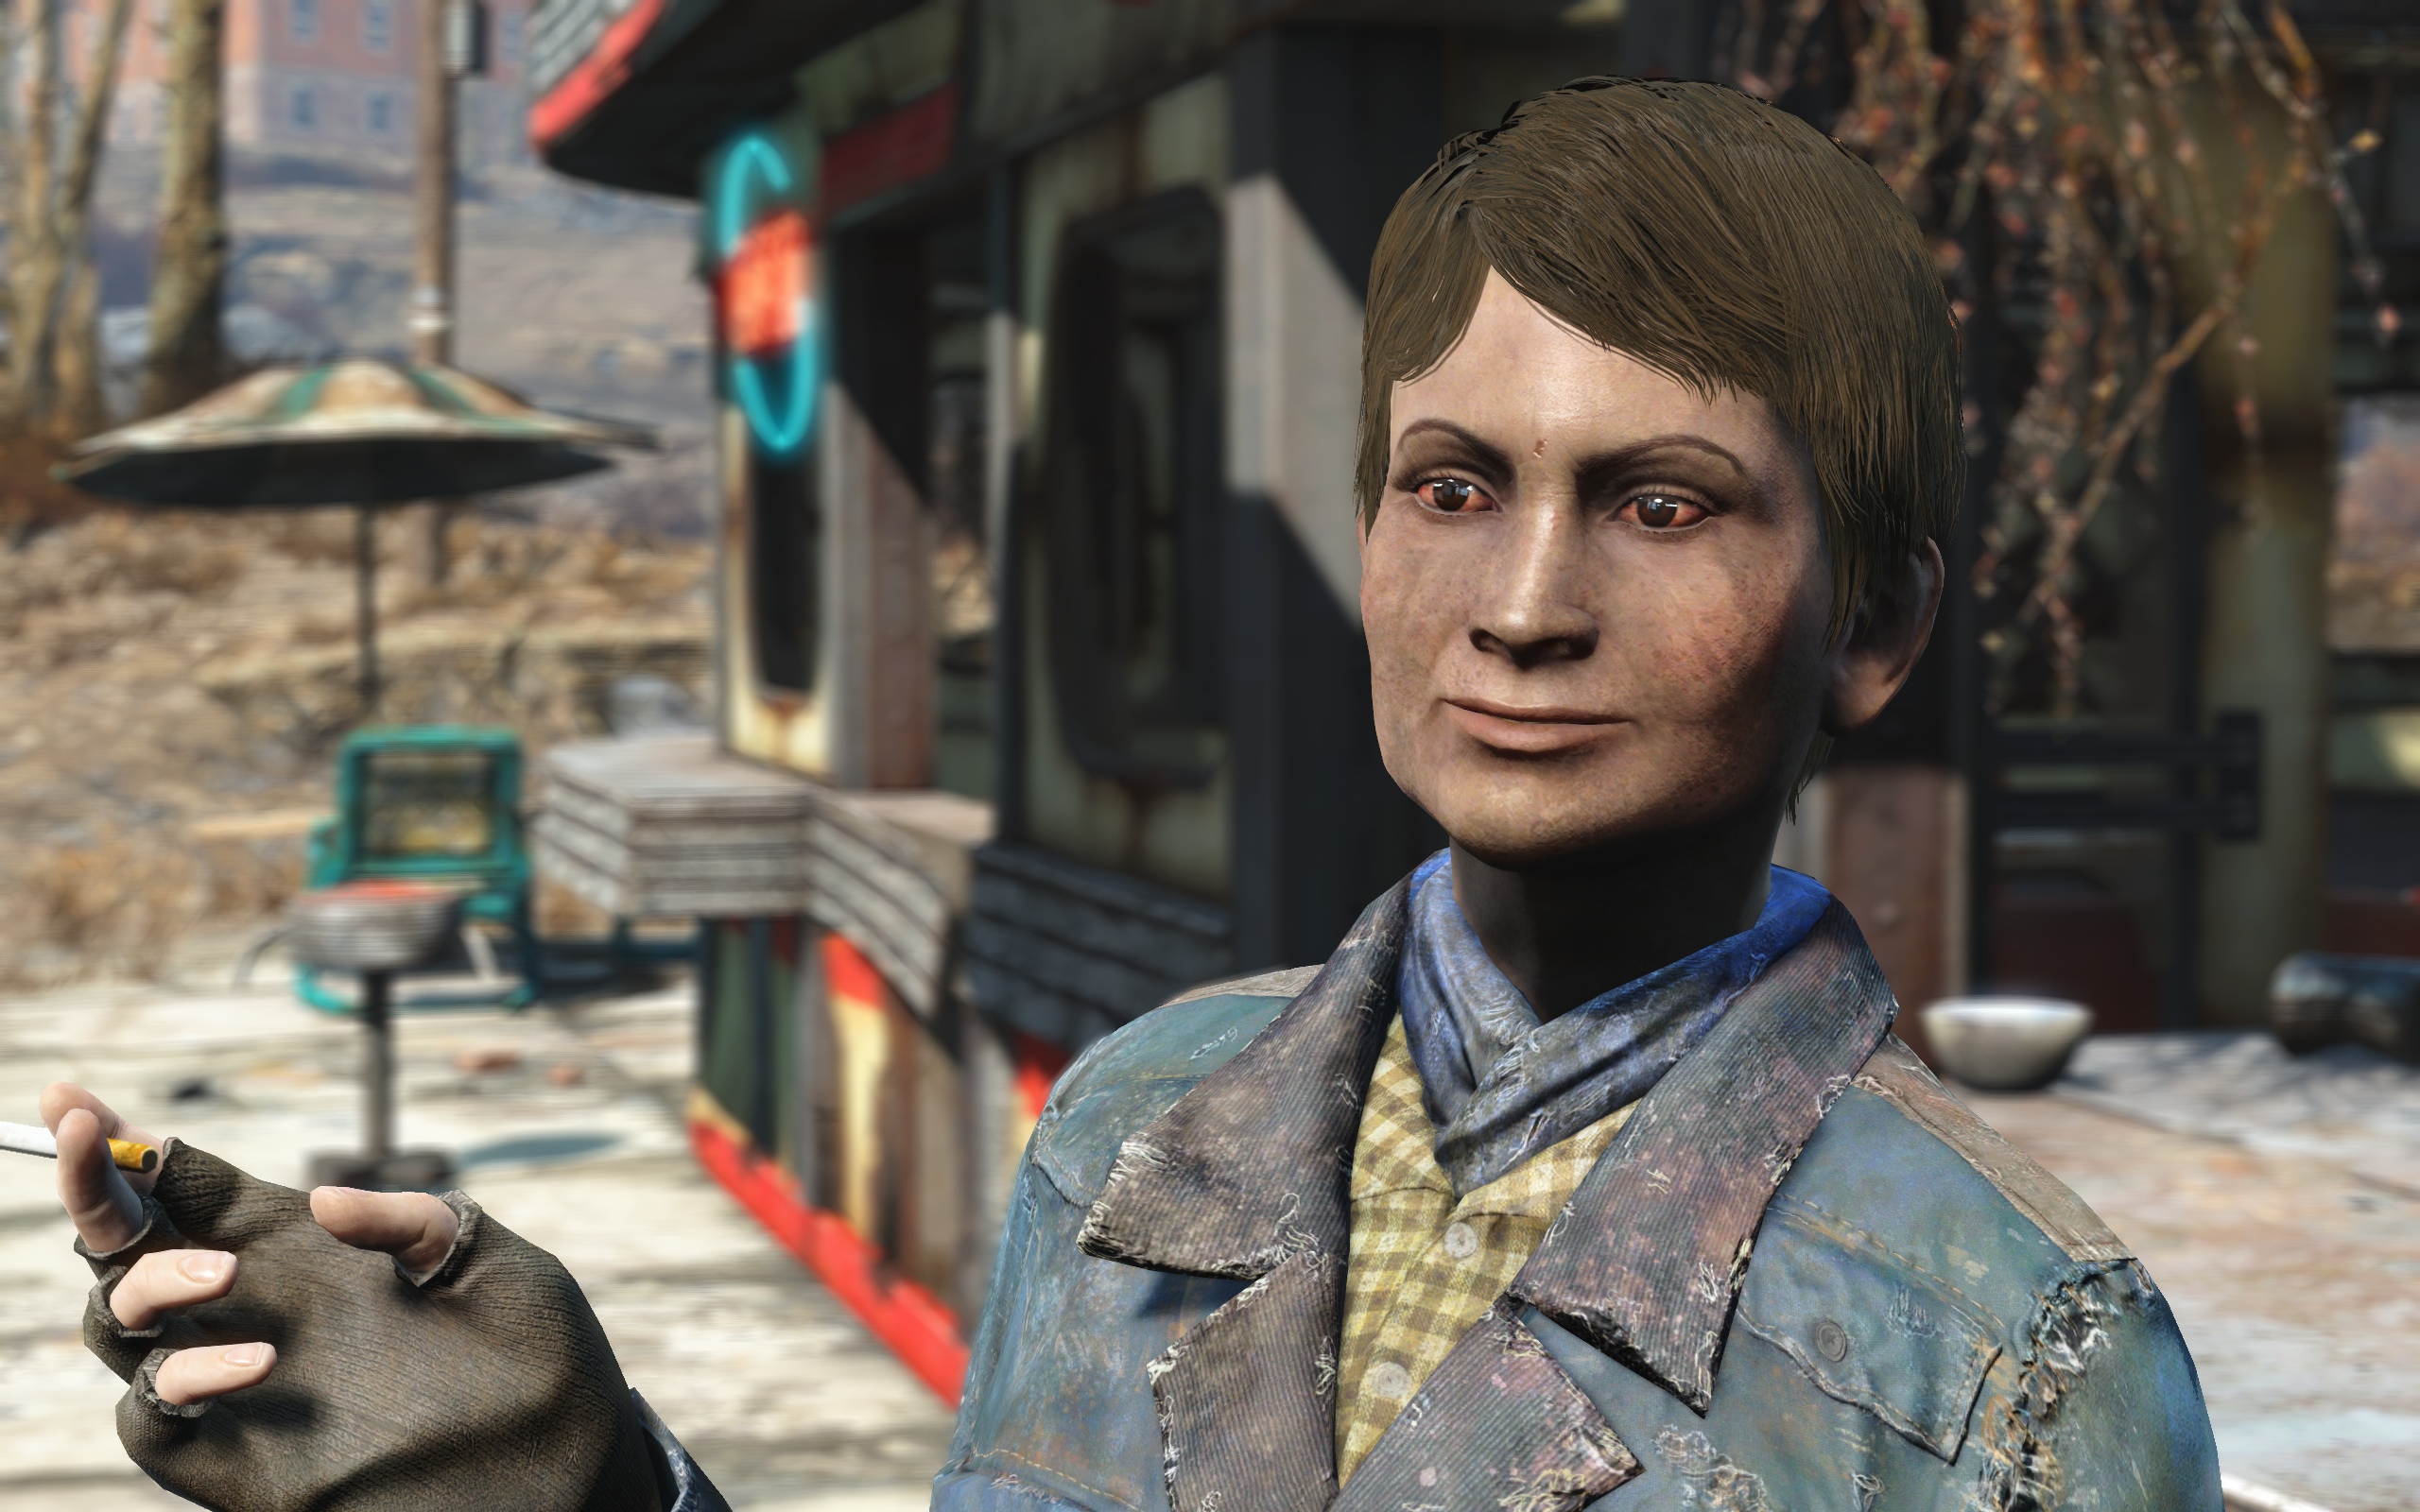 Voice-acting rights halt effort to put Fallout 3 inside Fallout 4